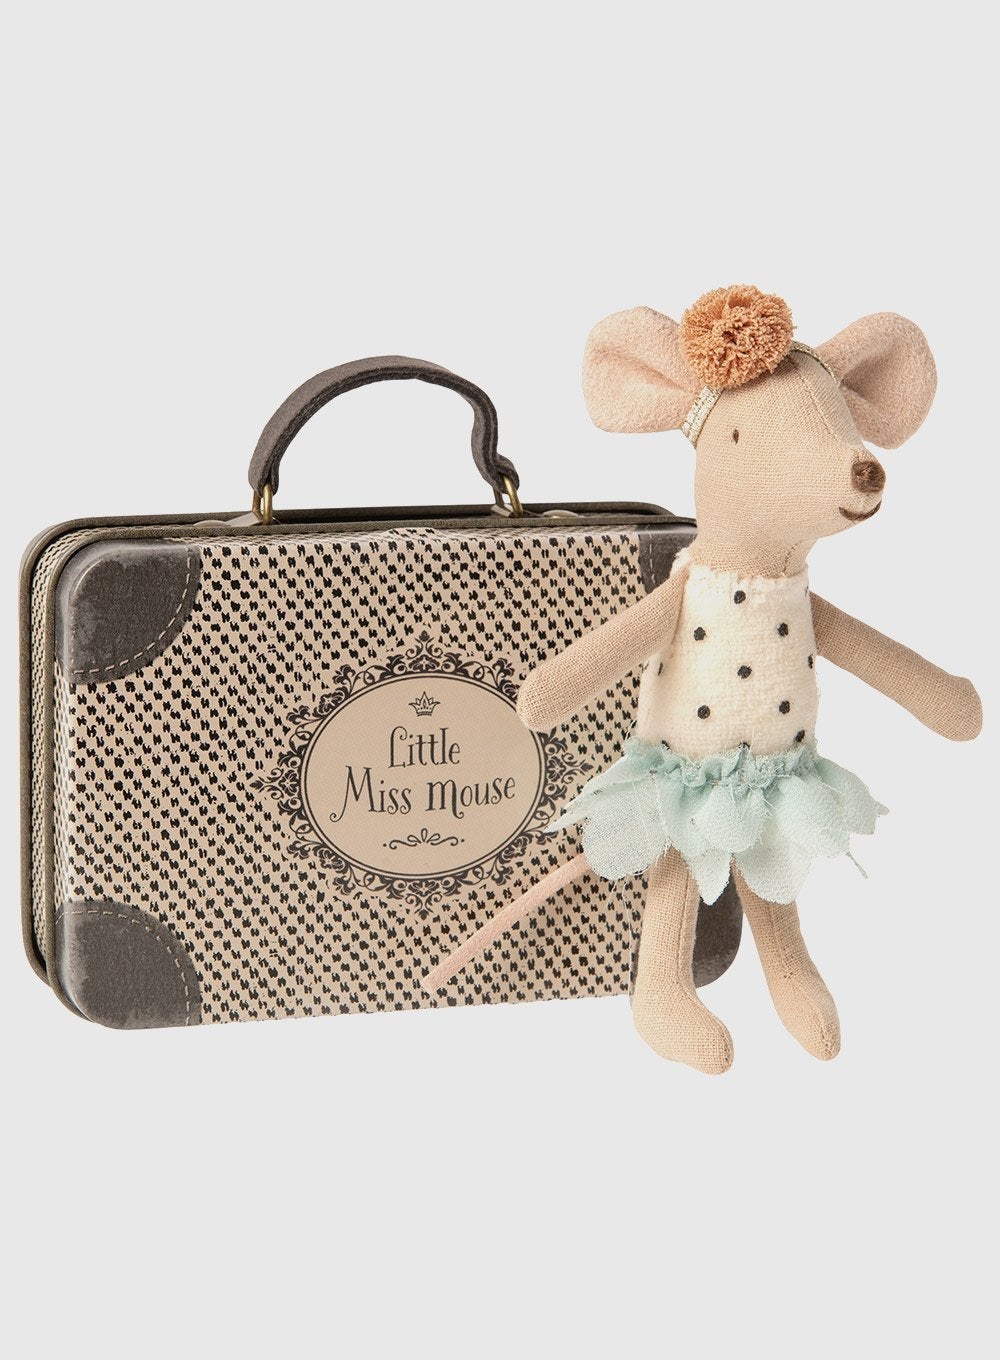 Maileg Toy Maileg Little Sister Mouse with a Suitcase